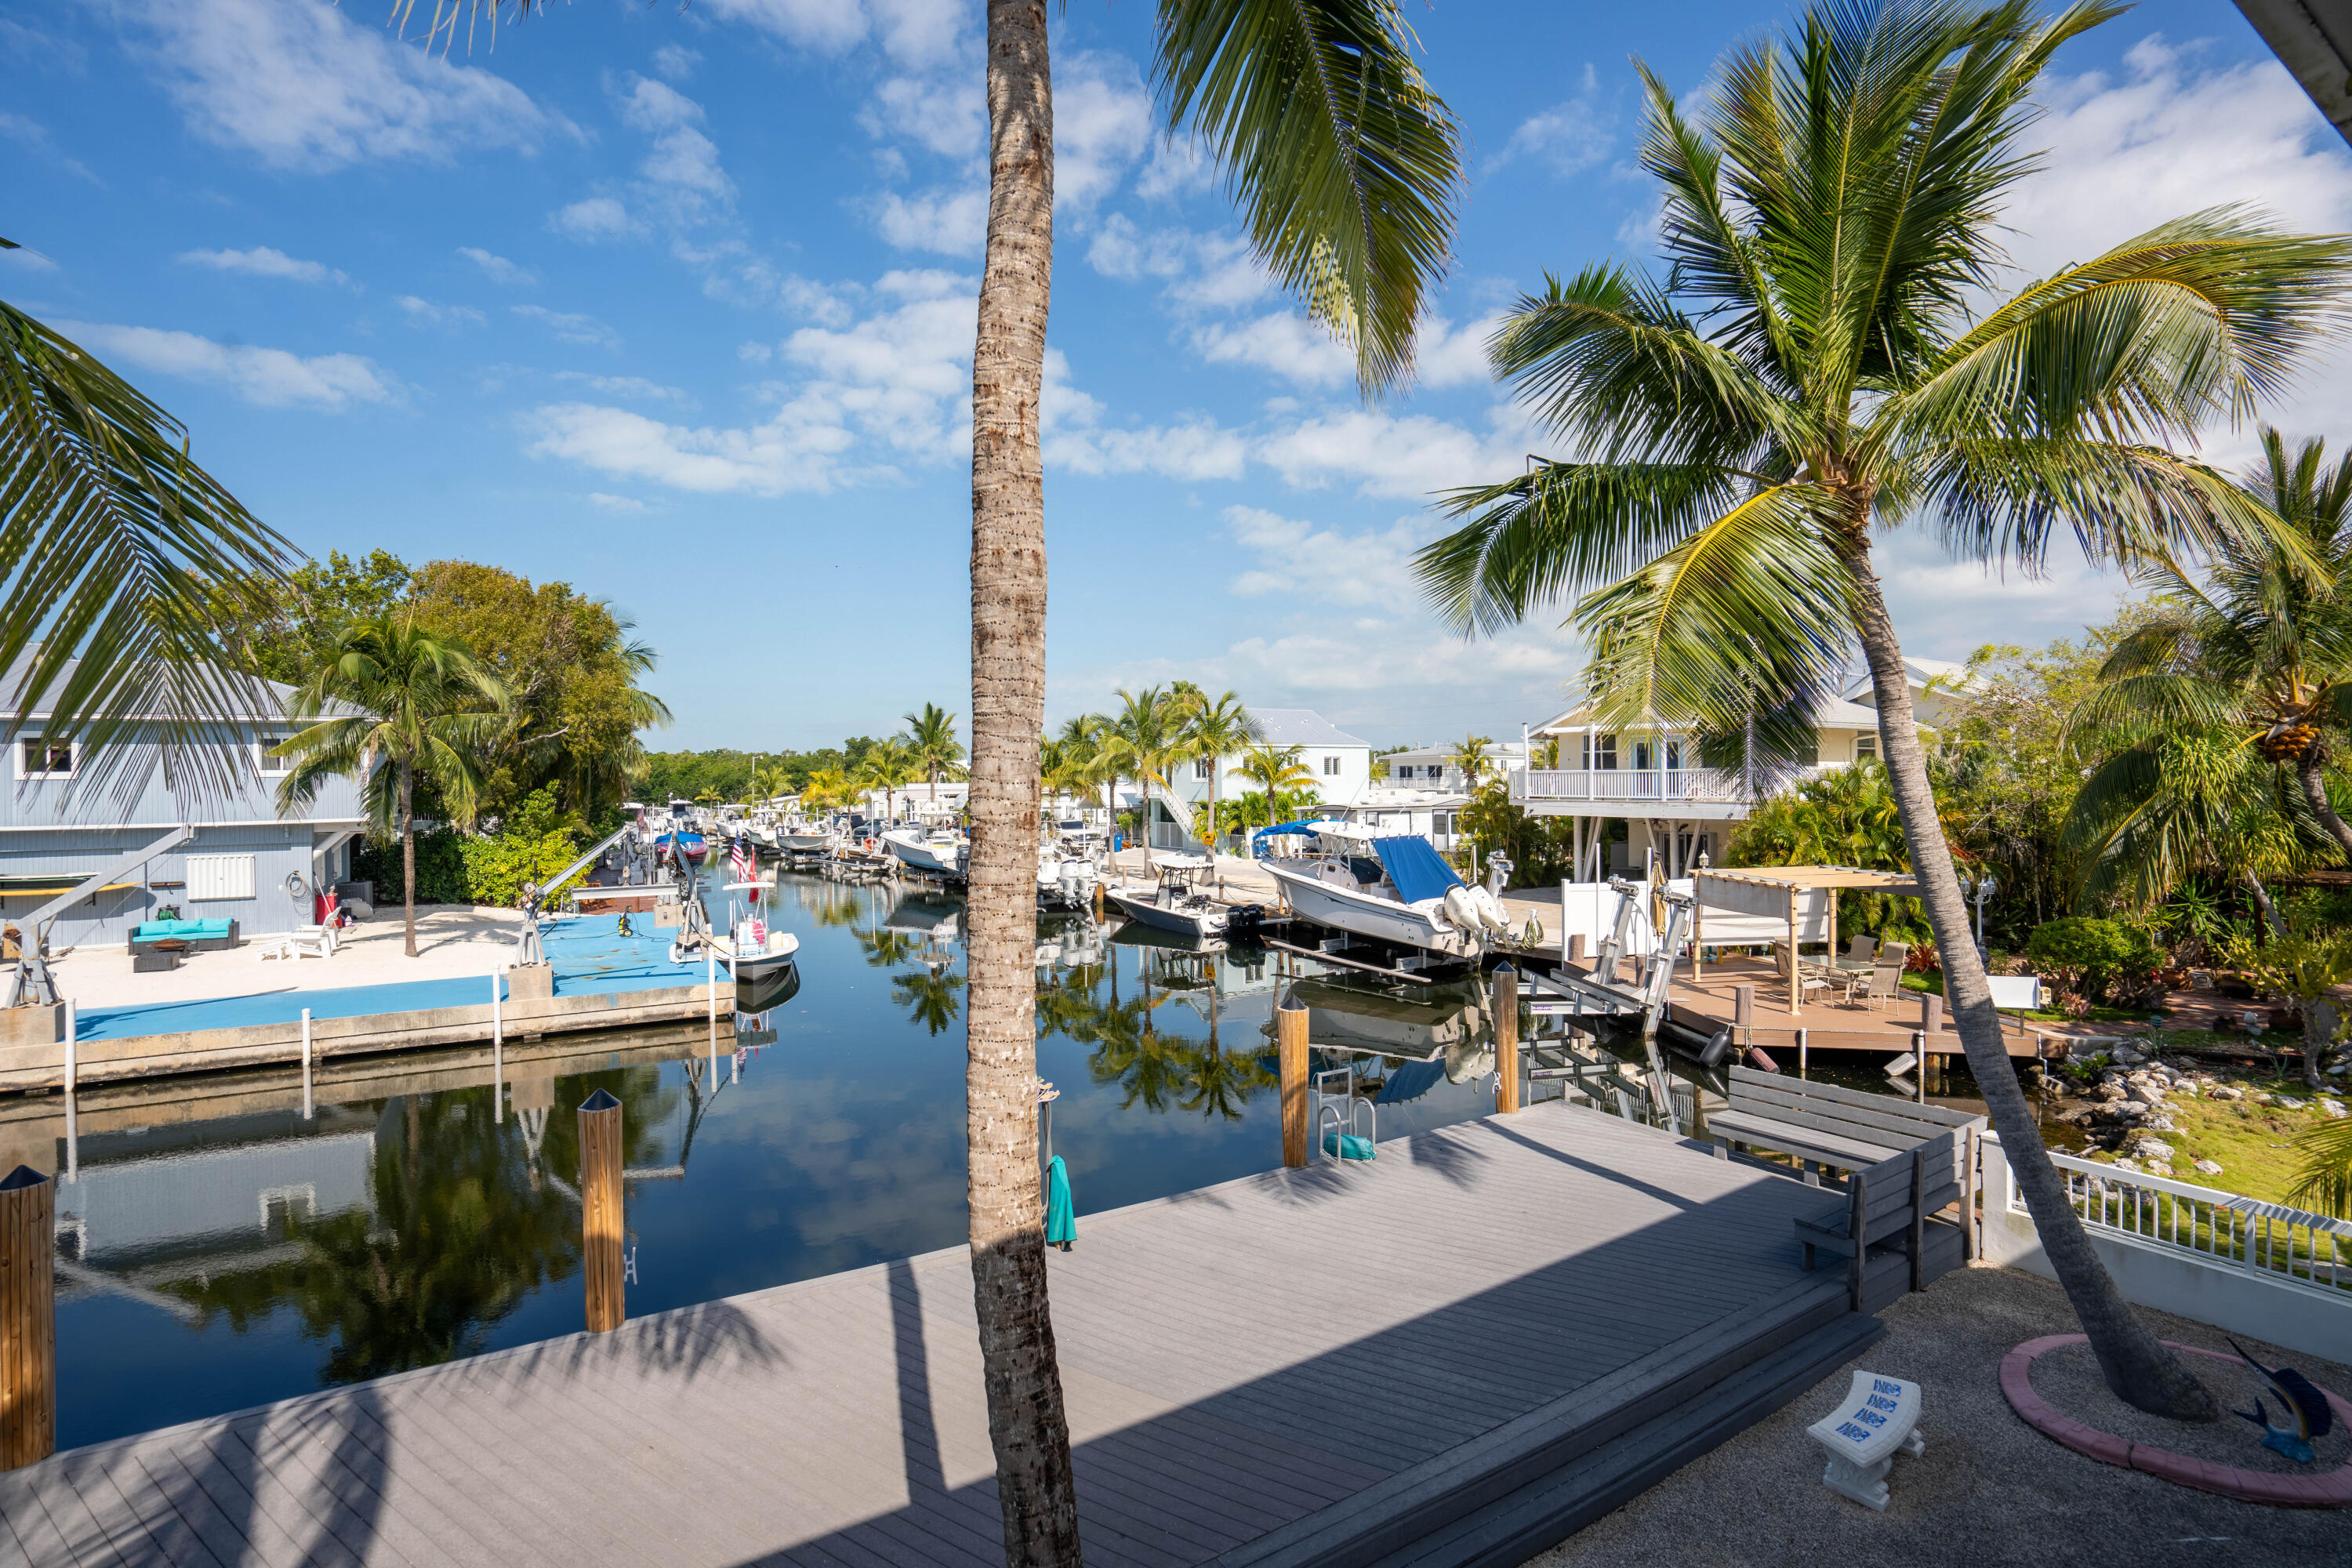 23 Harbor Drive, Key Largo, Florida, 33037, United States, 3 Bedrooms Bedrooms, ,3 BathroomsBathrooms,Residential,For Sale,23 Harbor Drive,1509507